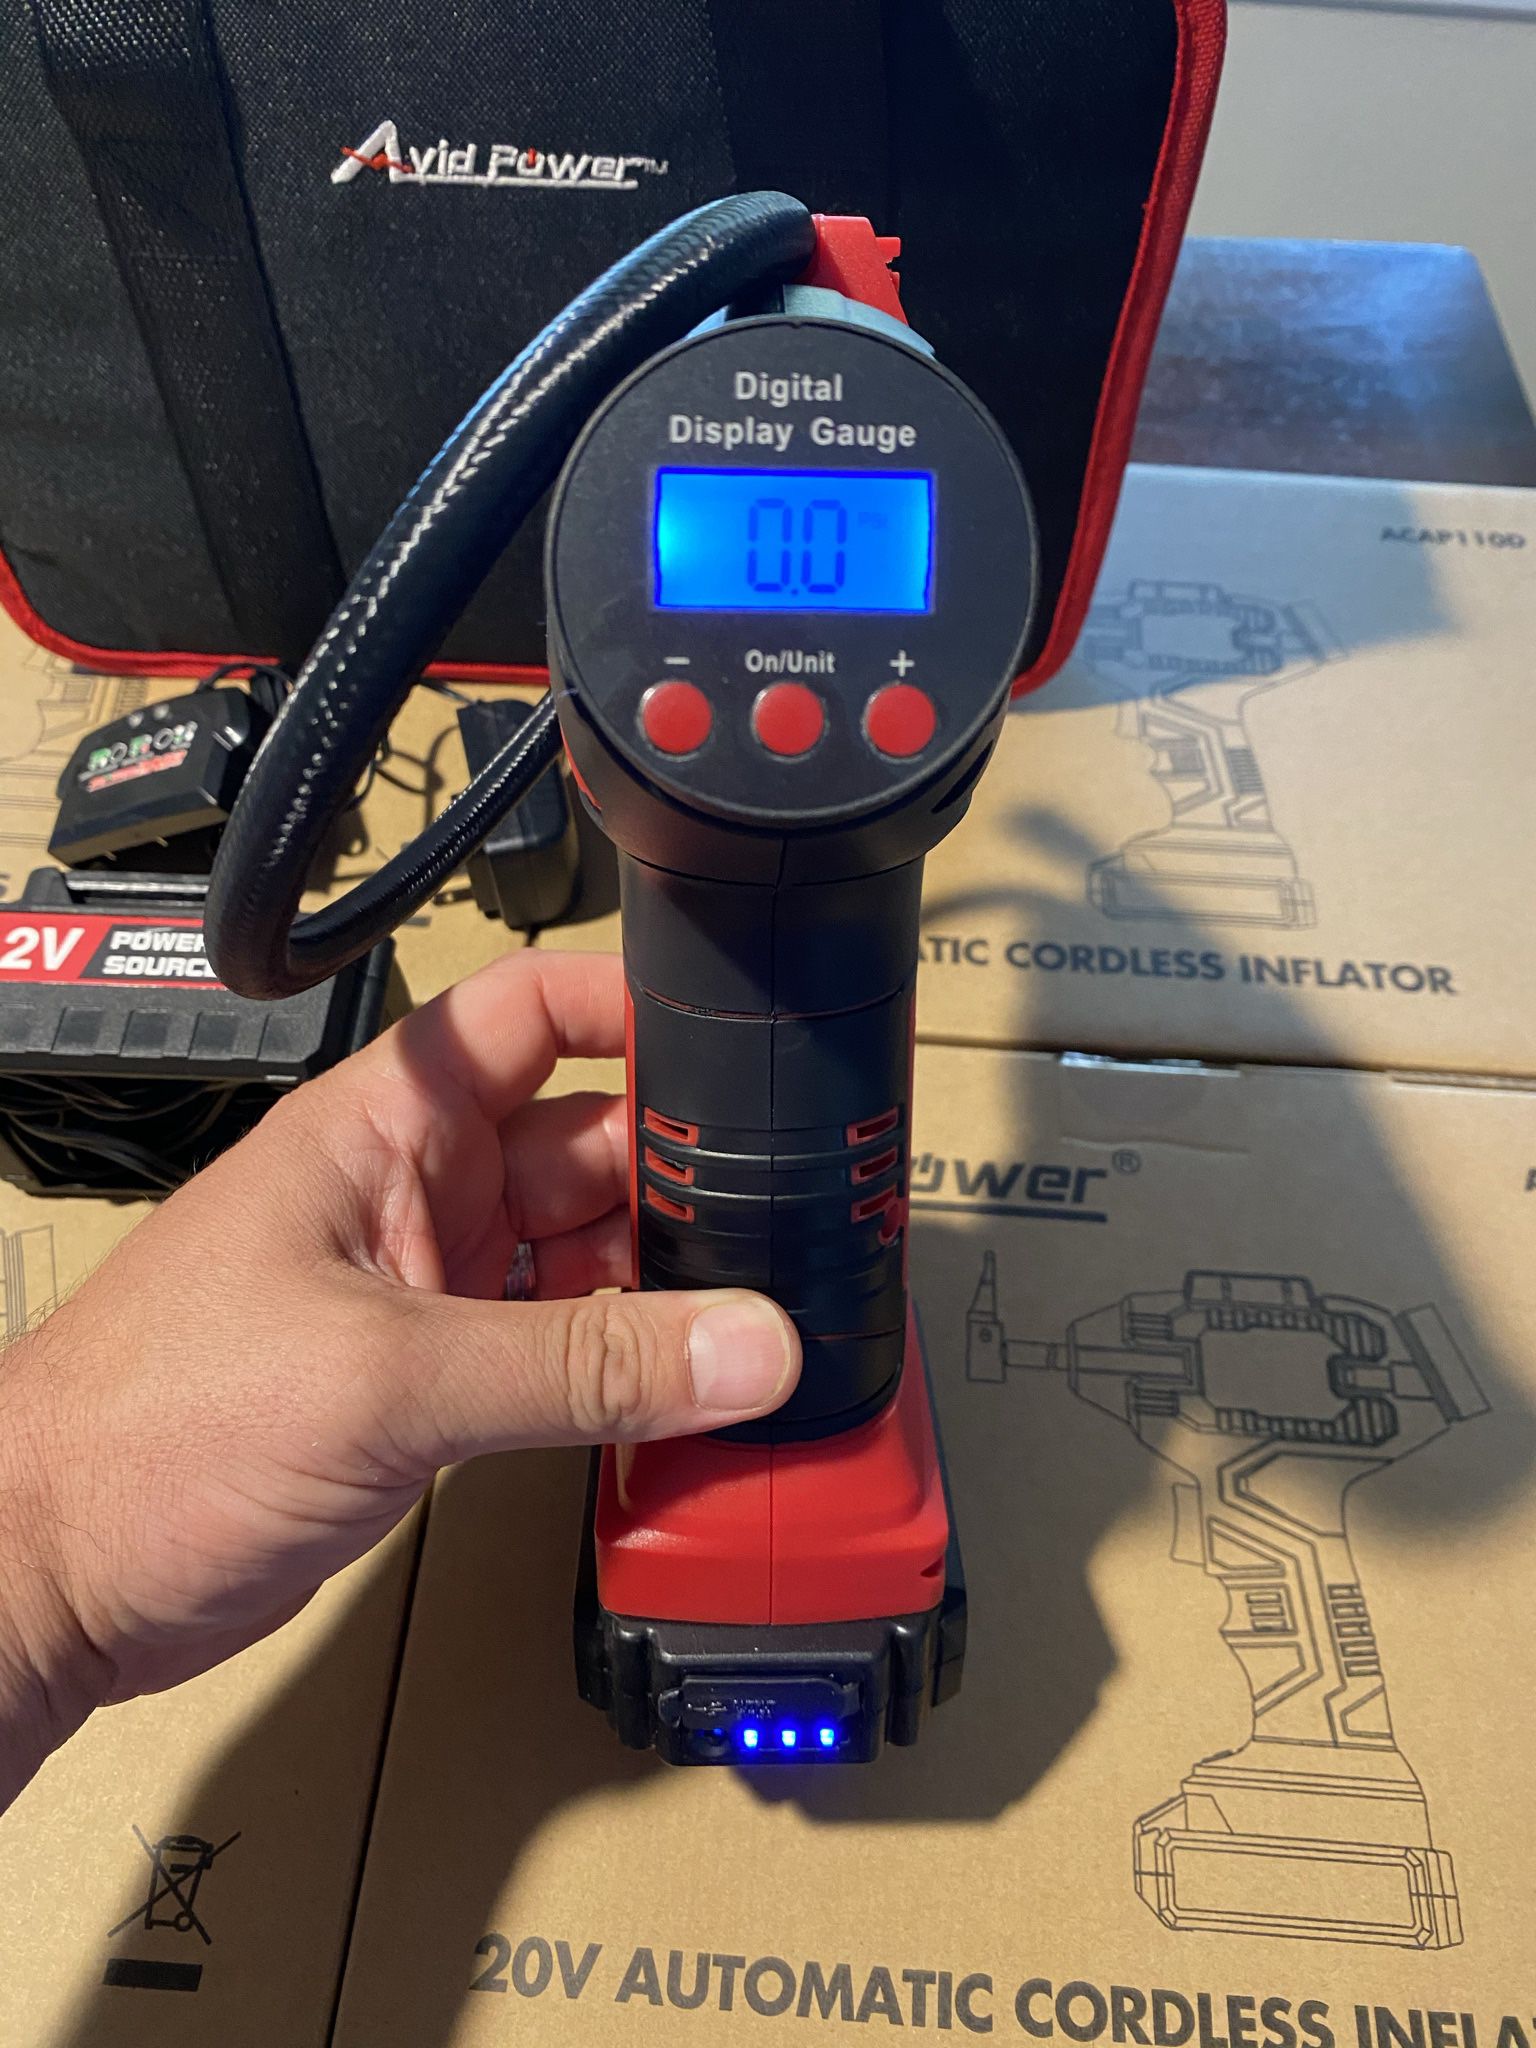 AVID POWER Tire Inflator Air Compressor, 20V Cordless Car Tire Pump with  Rechargeable Li-ion Battery, 12V Car Power Adapter, Digital Pressu for Sale  in Riverside, CA - OfferUp